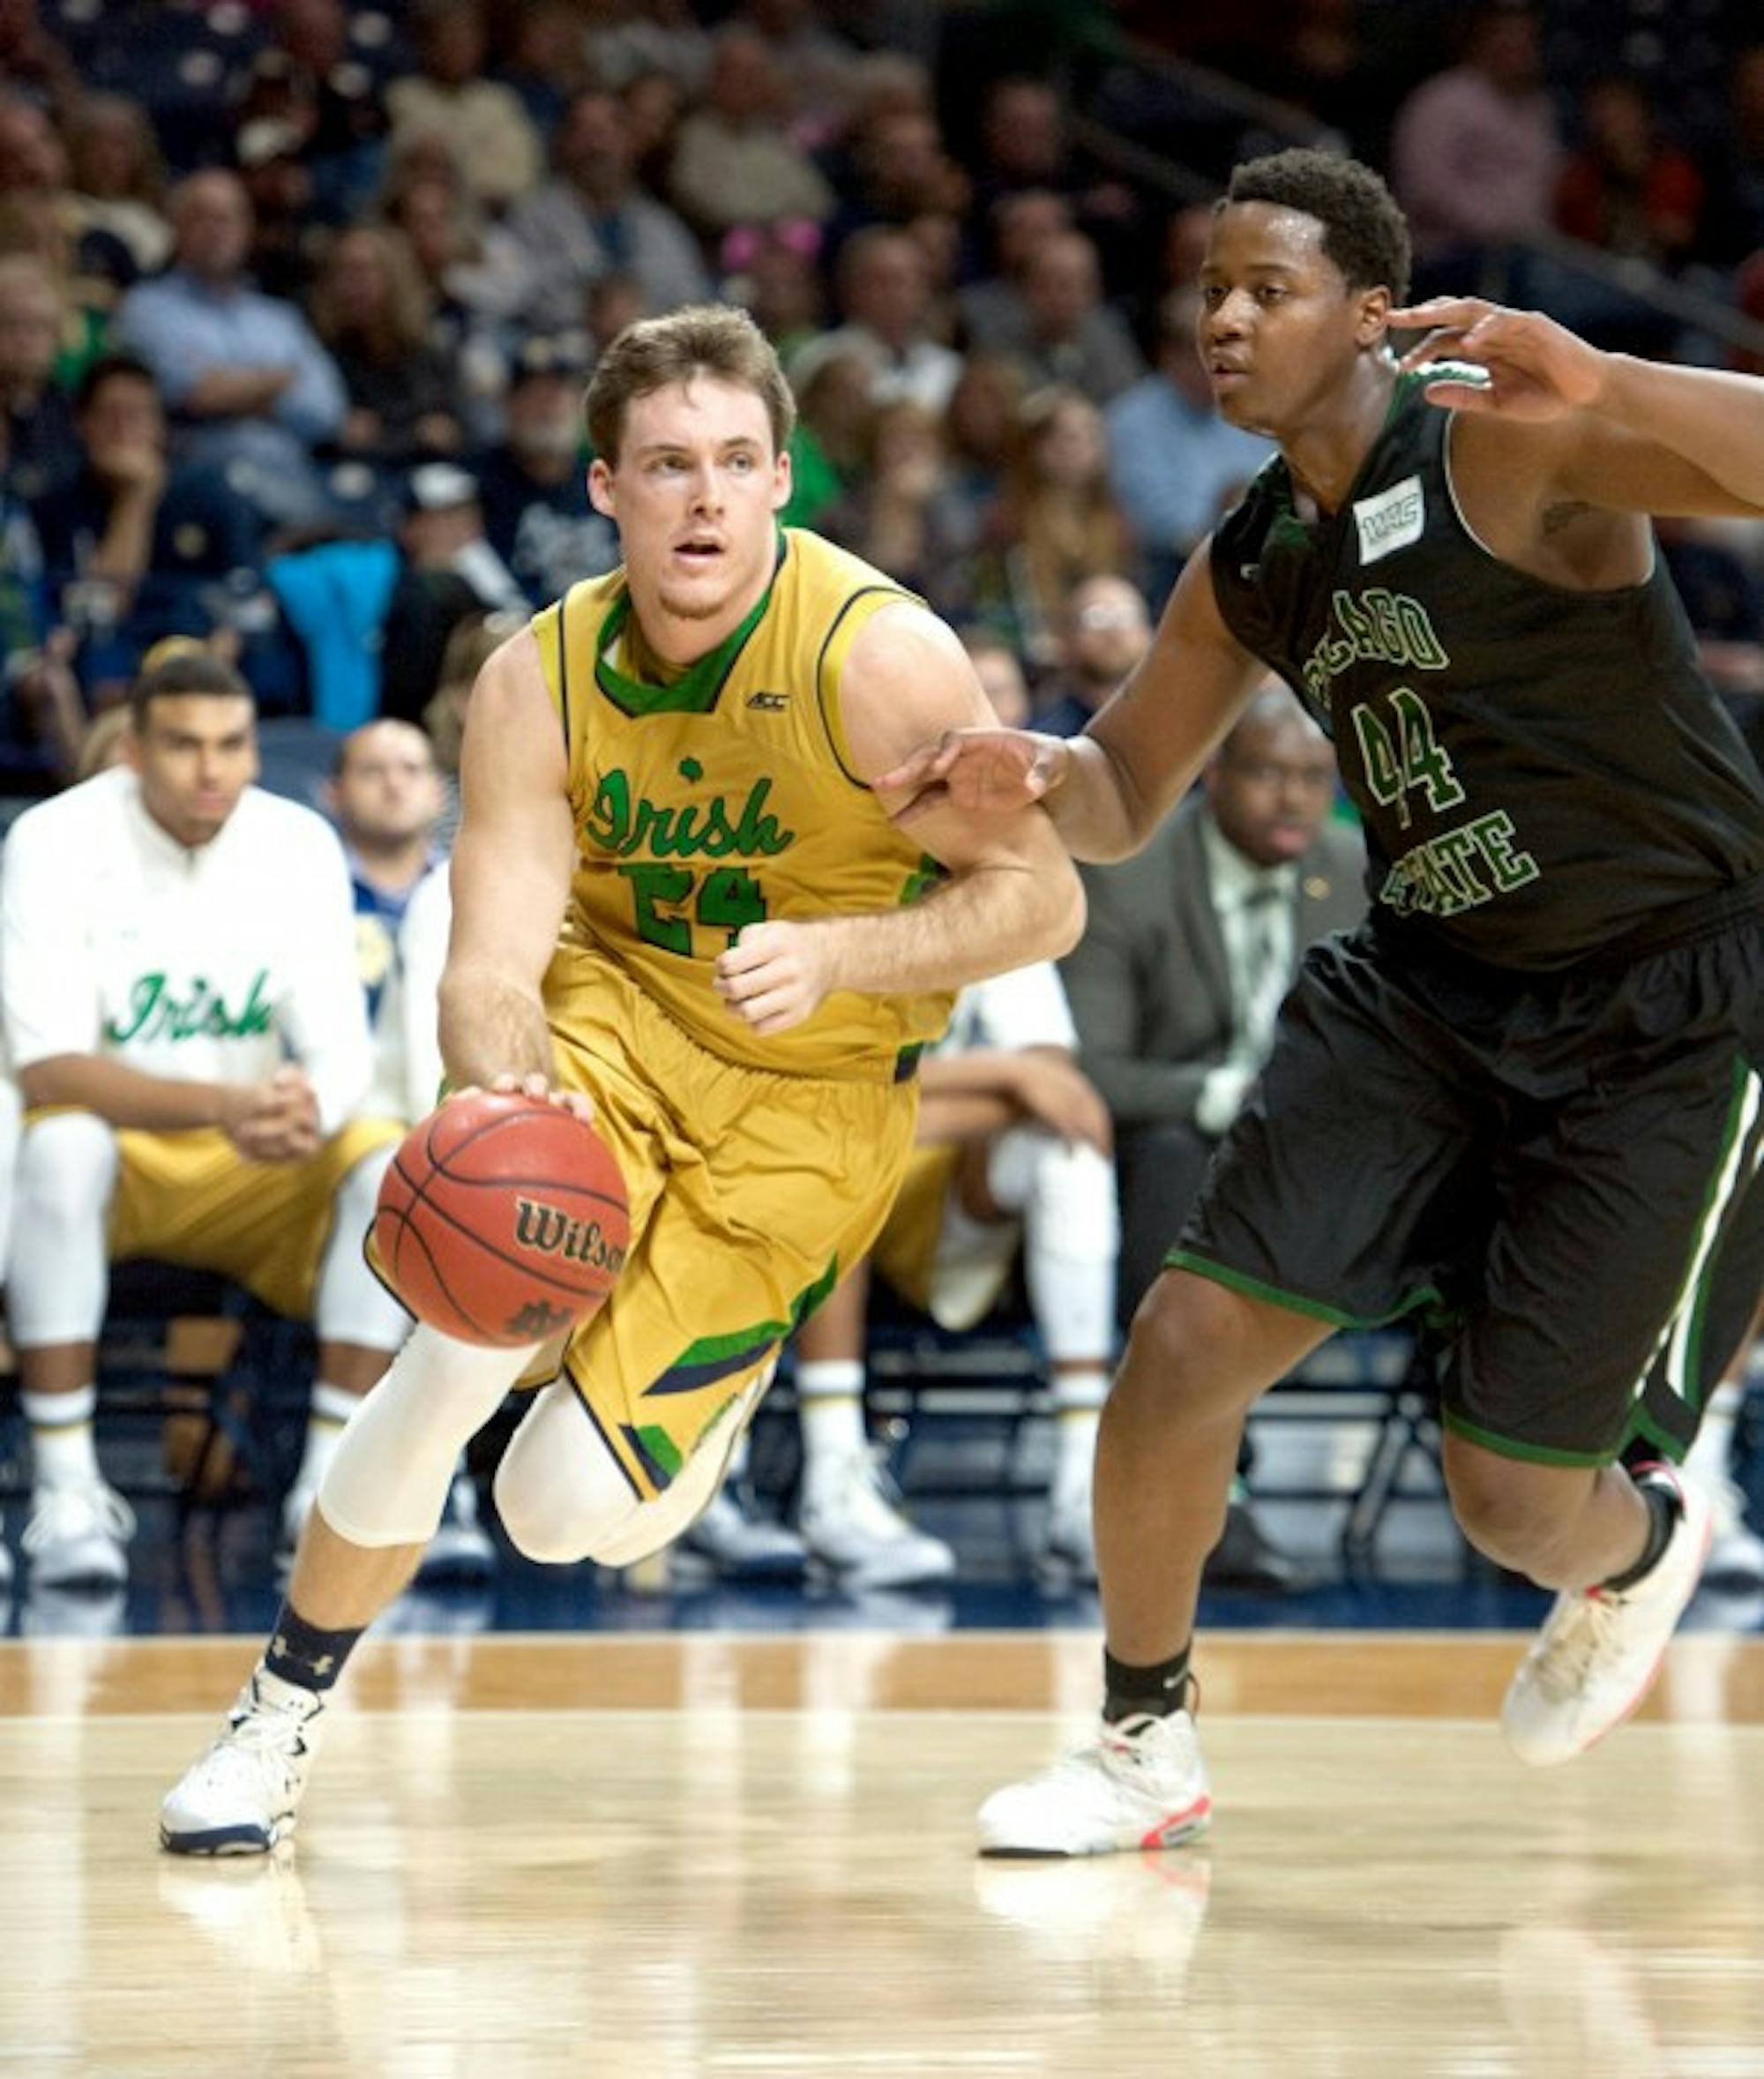 Irish senior guard/forward Pat Connaughton cuts by a defender during Notre Dame's 90-42 win over Chicago State on Nov. 29.